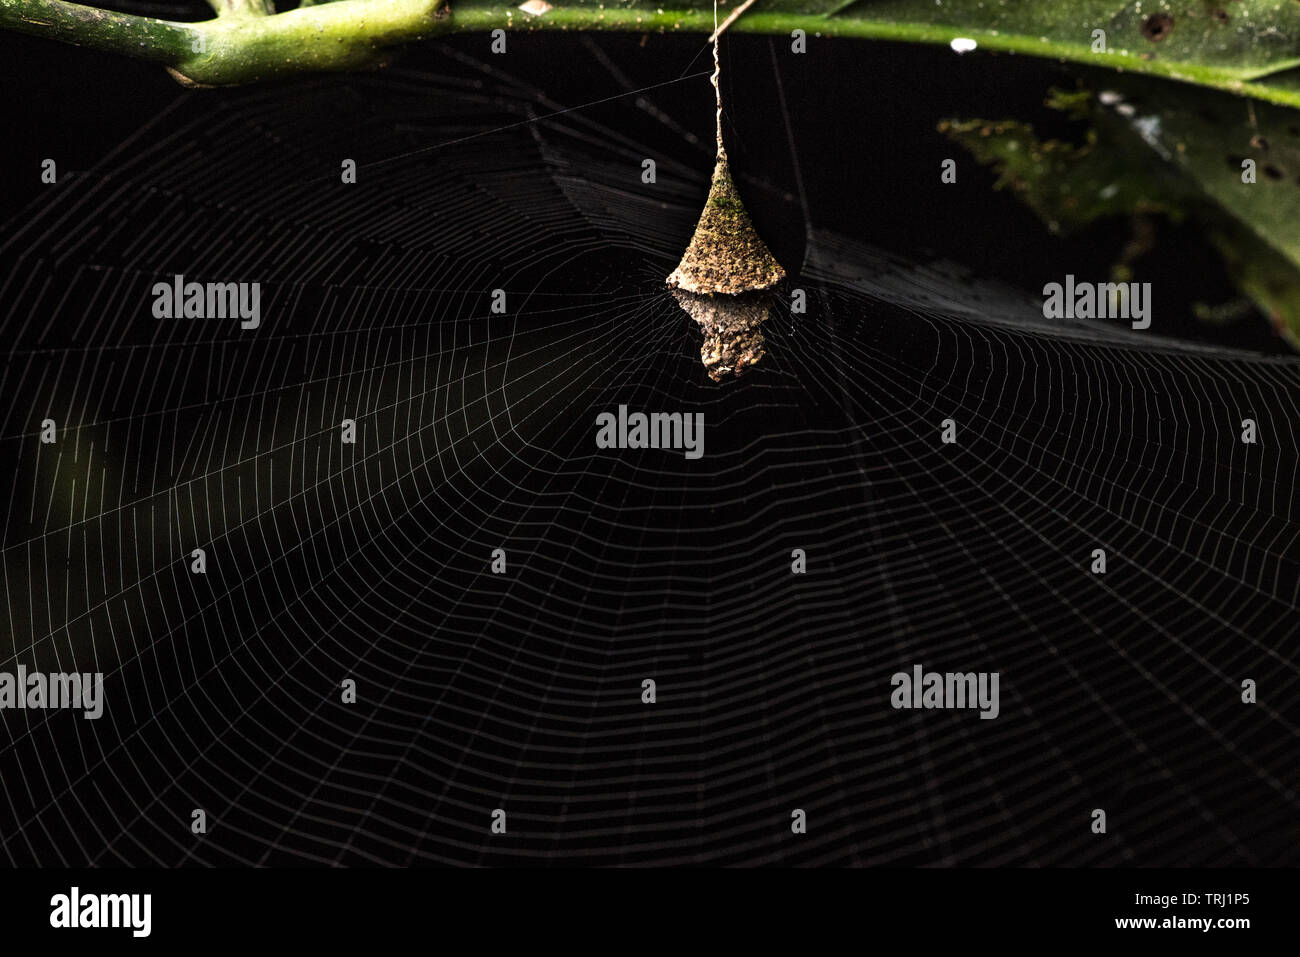 An unusual spider web, a cone like structure hangs in the center and the spider hides within only emerging when an insect gets trapped in the web. Stock Photo